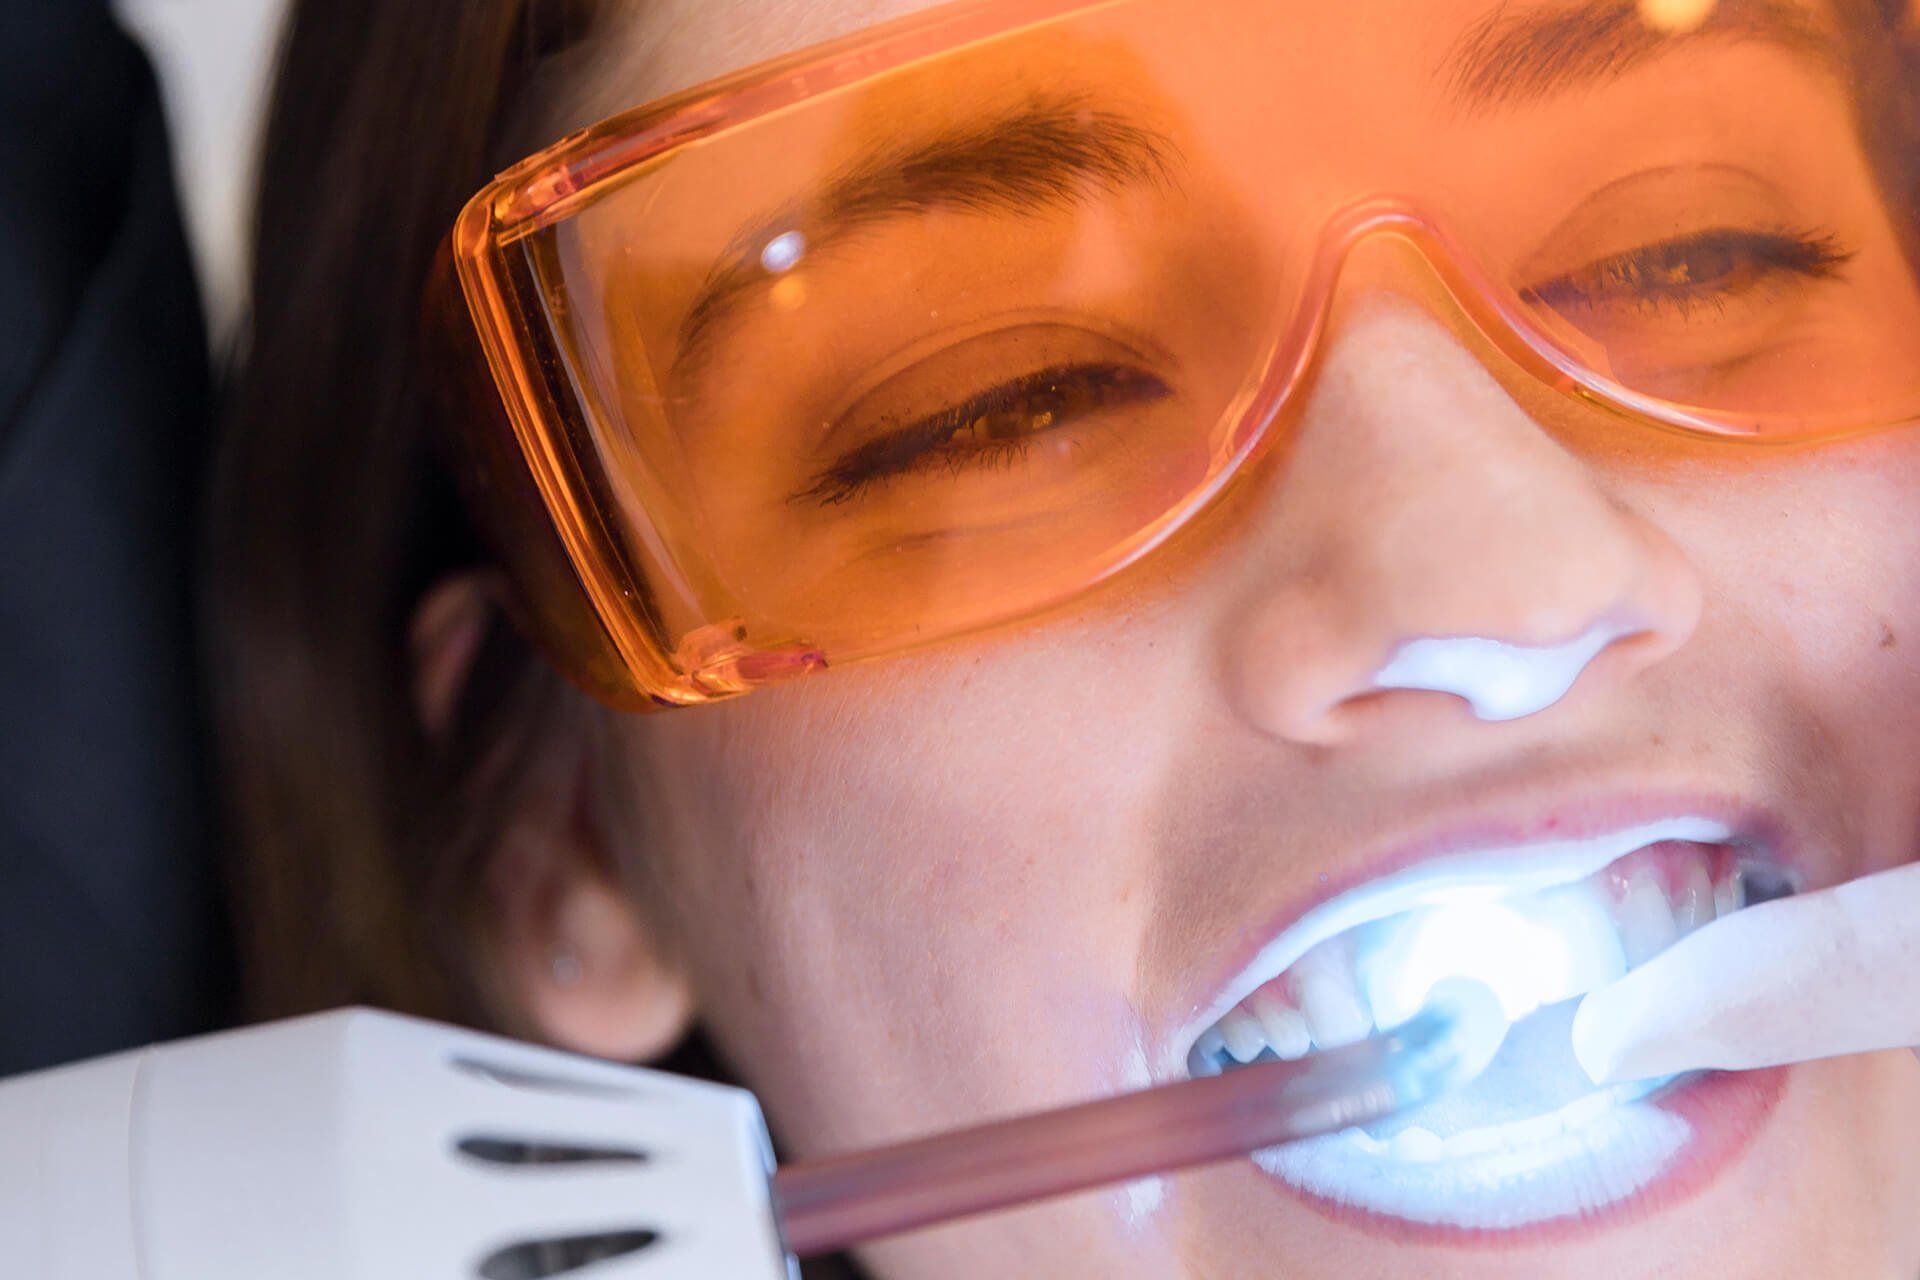 female patient's face going through laser teeth whitening treatment